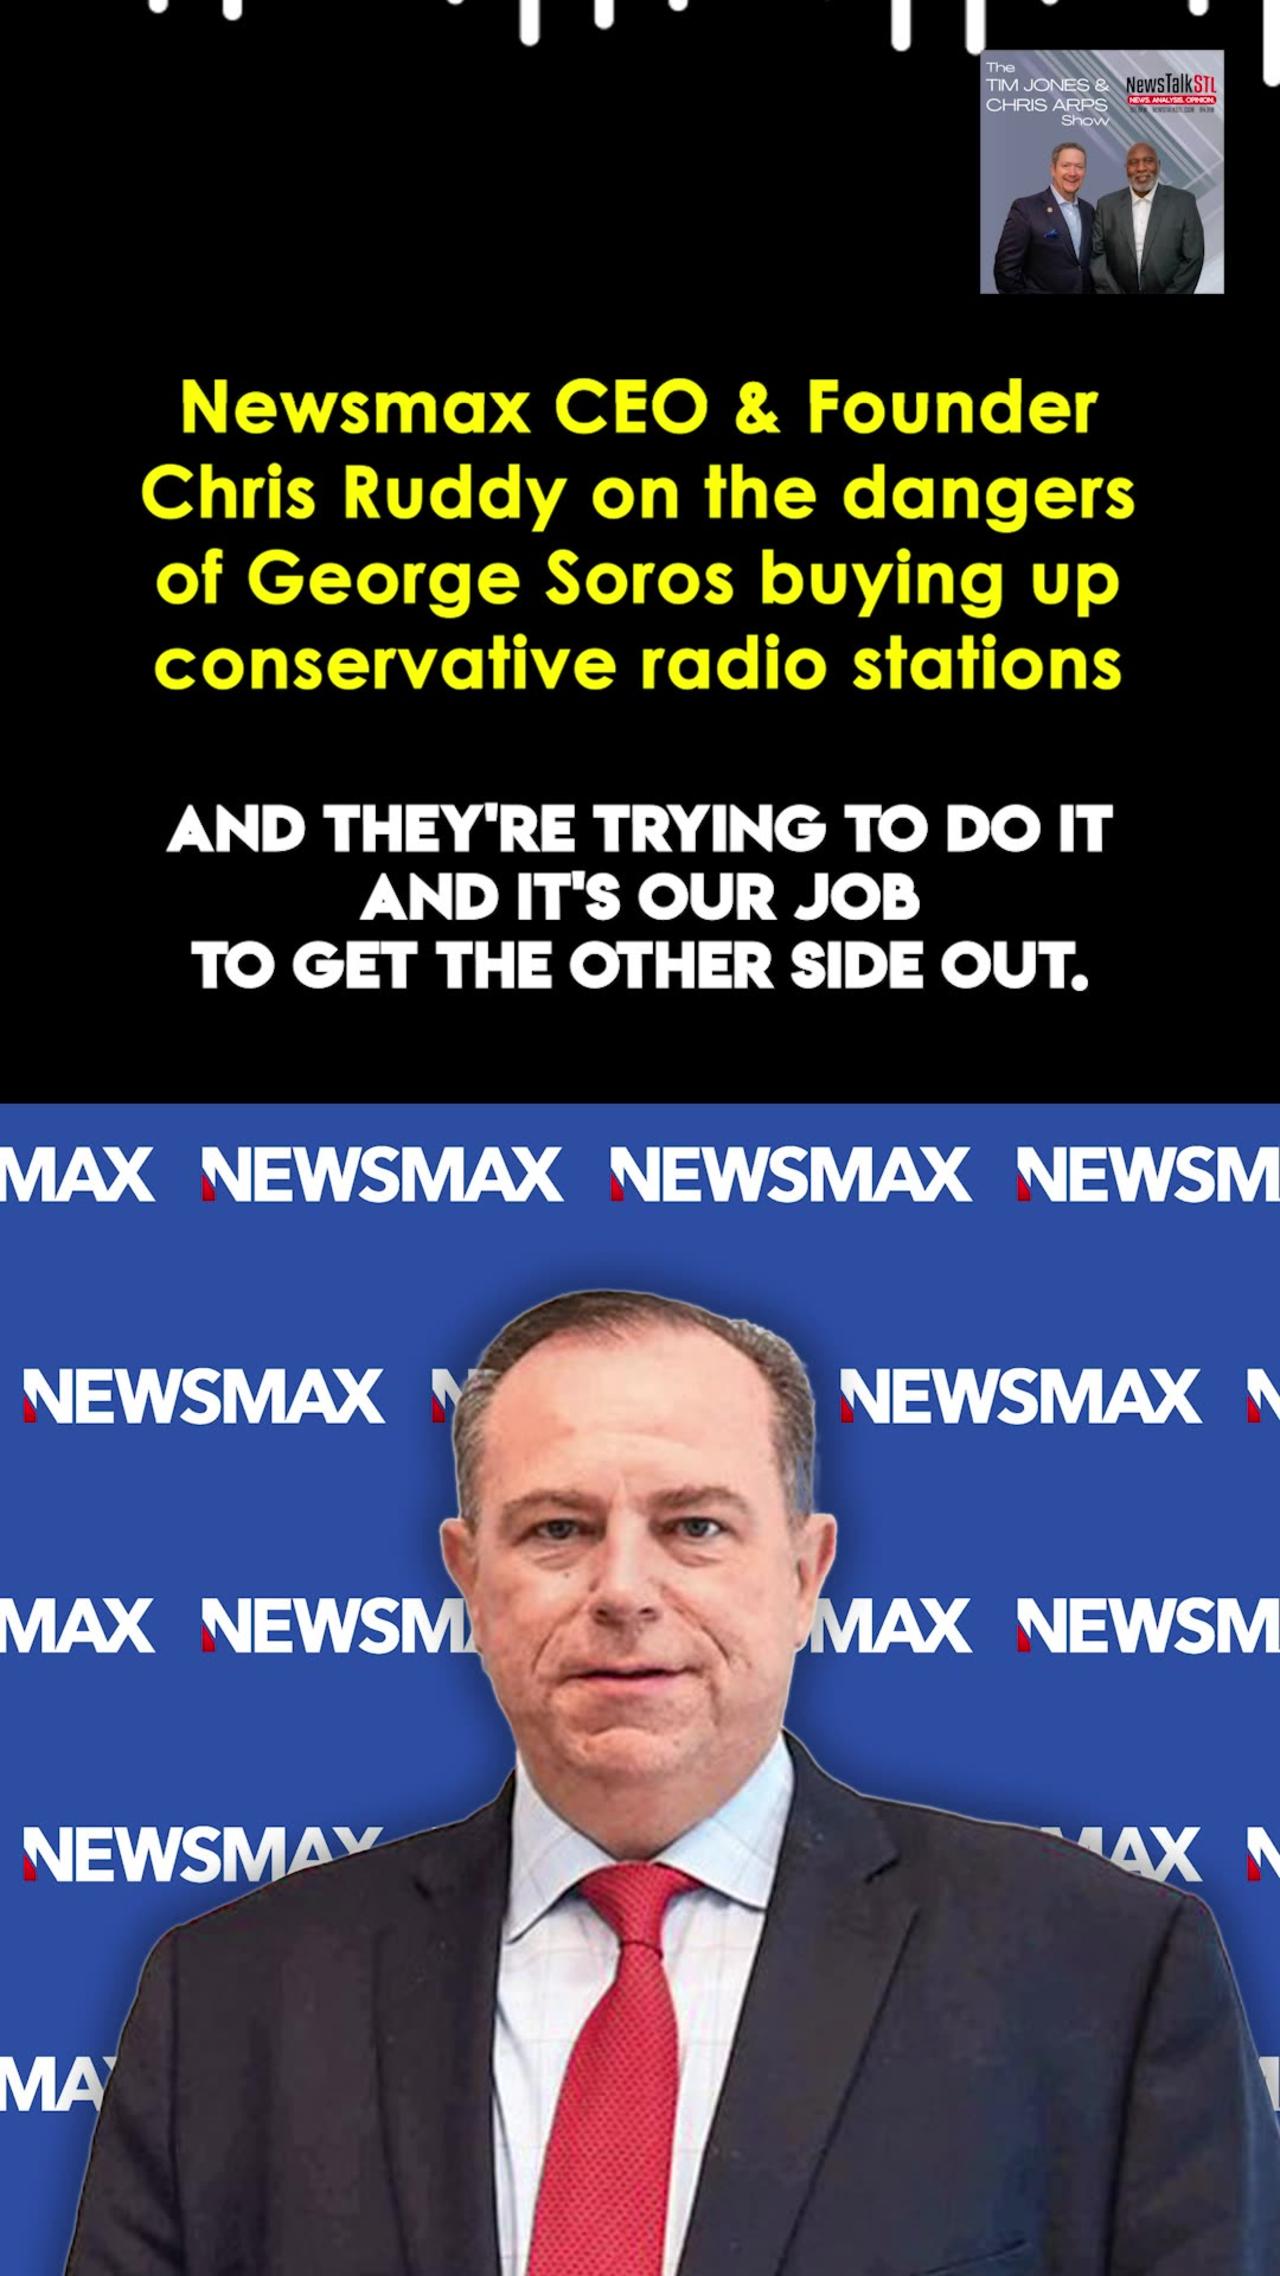 Newsmax CEO and Founder on the dangers of George Soros buying up conservative radio stations